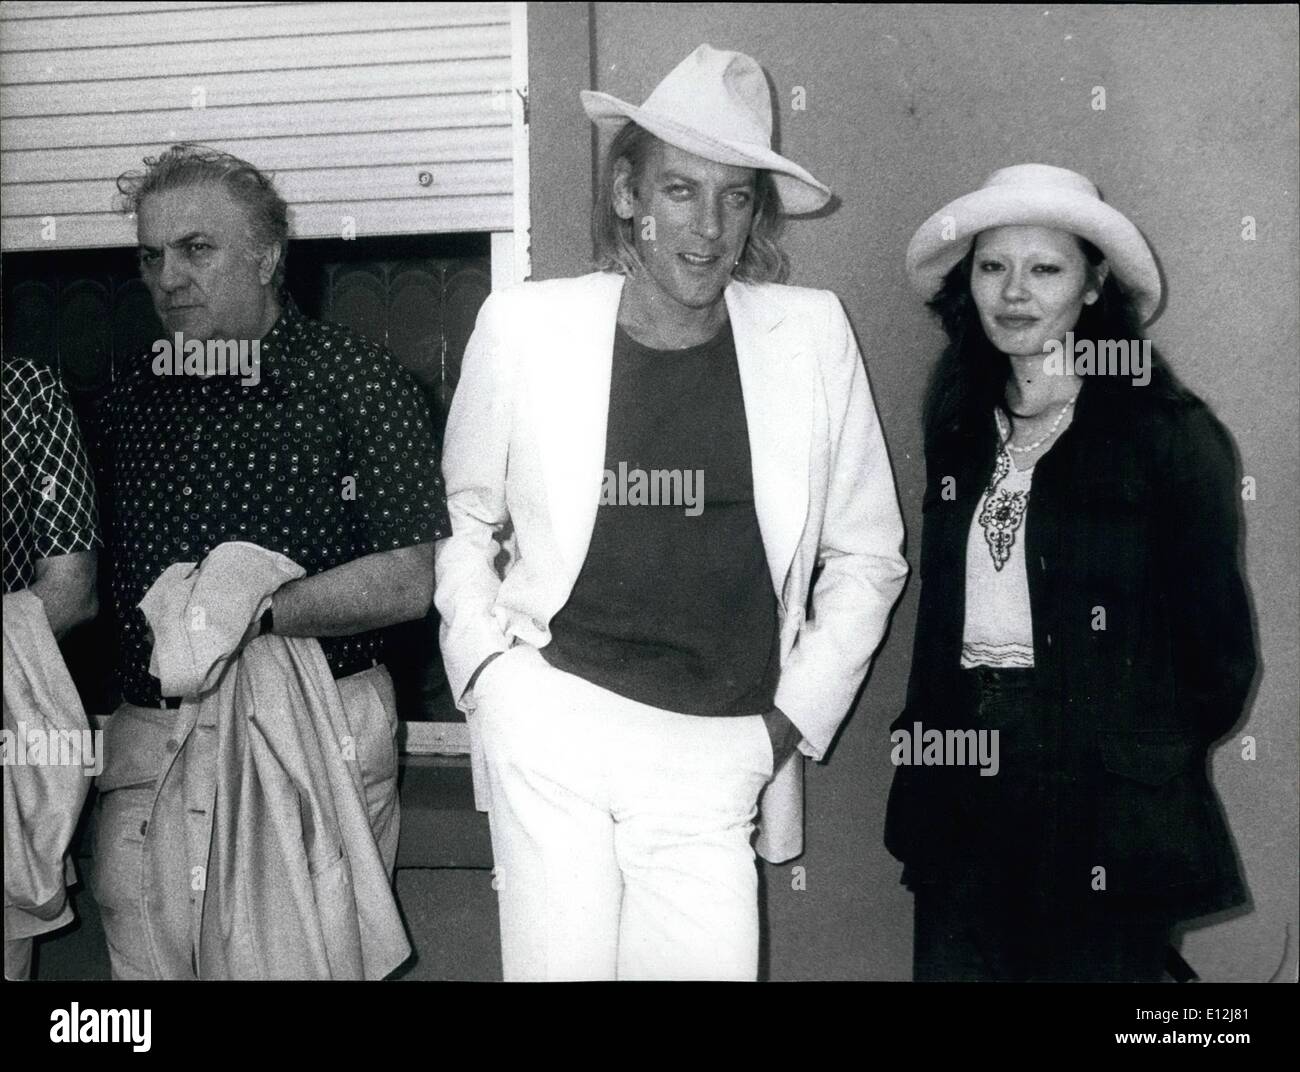 Feb. 24, 2012 - The film ''Casanova' directed by Federico Fellini finally begins after the much financial misfortunes. The great lover will be Donald Sutherland and Margareth Clementi will be one of the Casanova' victims. Photo shows Federico Fellini, Margareth Clementi and Donald Sutherland during the presentation of the film. Stock Photo